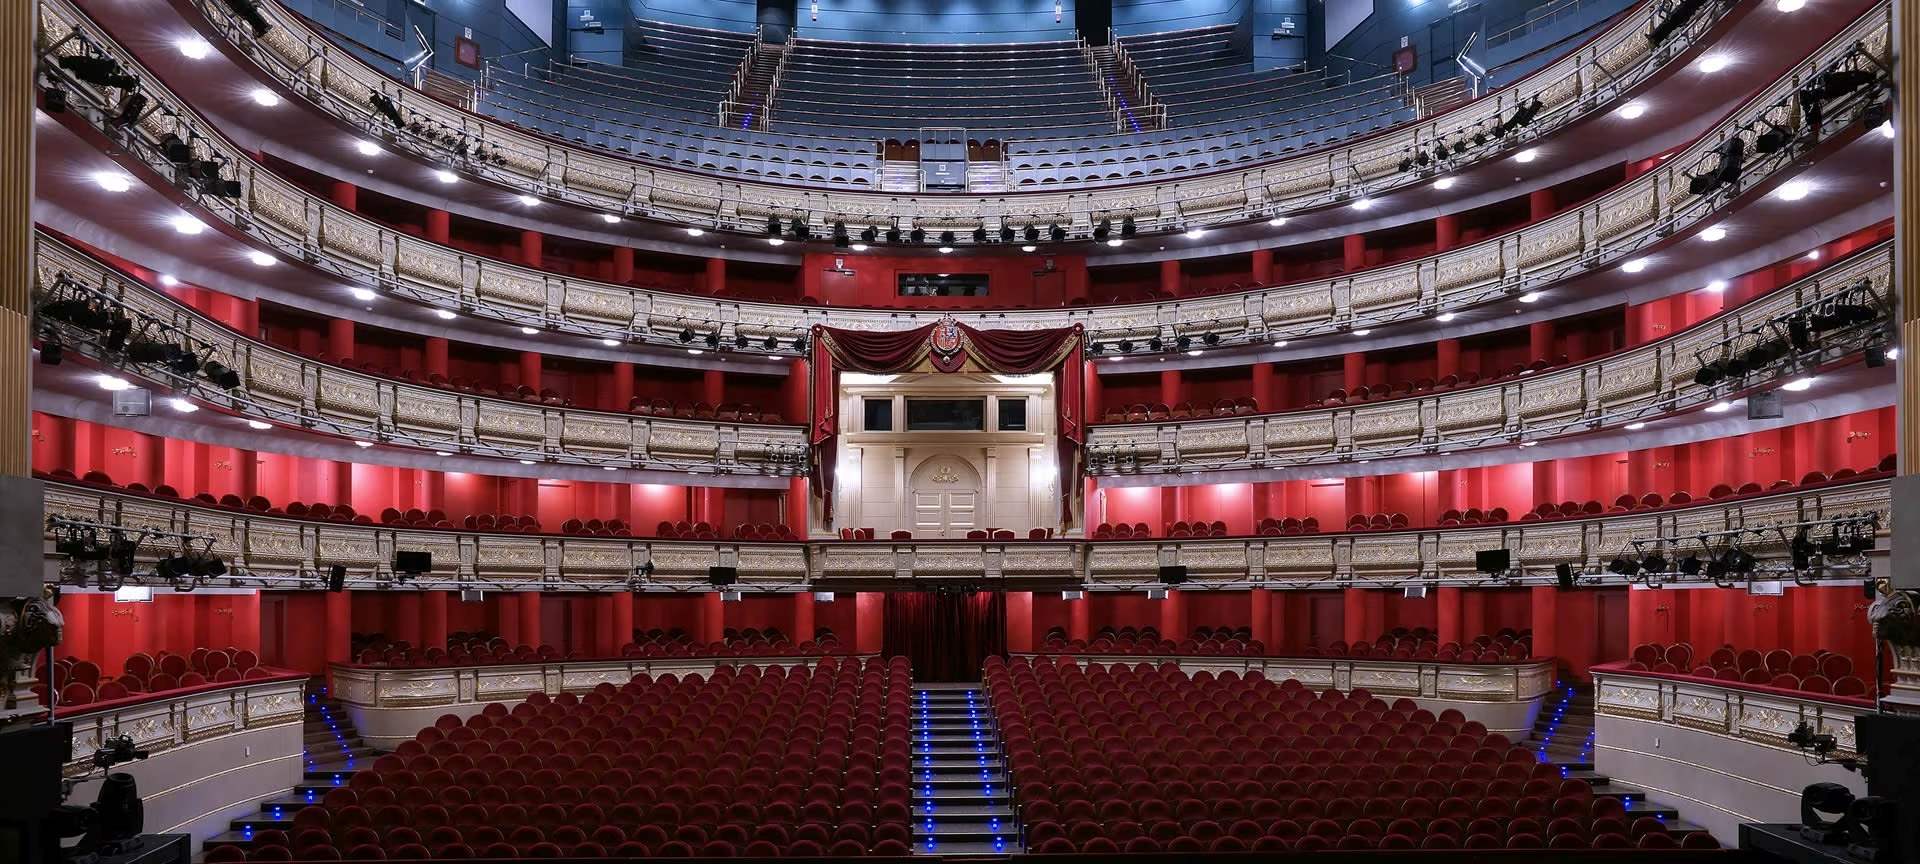 20-astonishing-facts-about-teatro-real